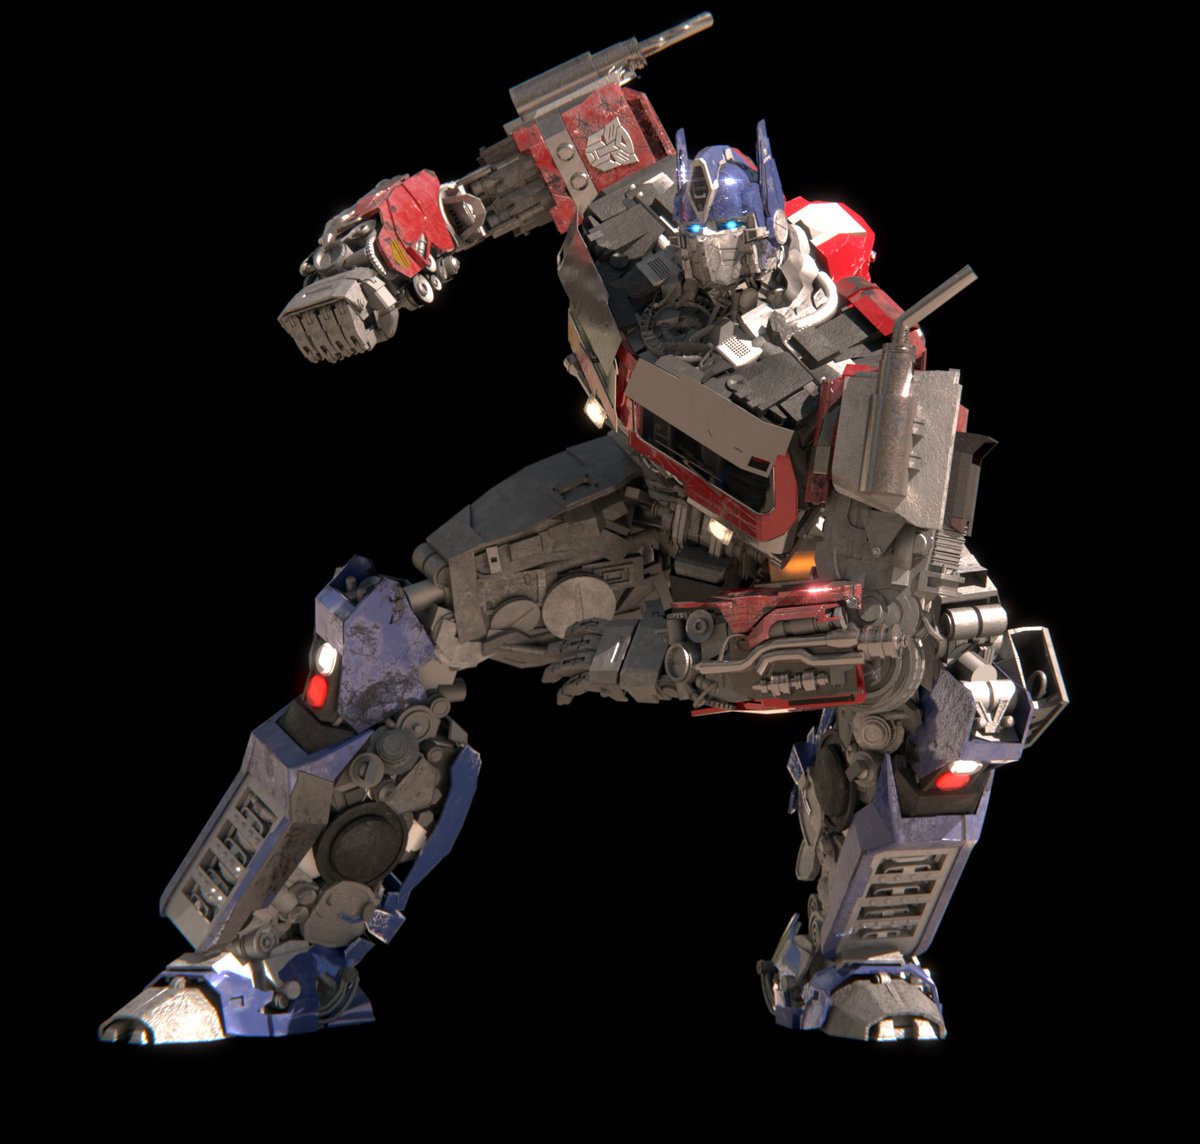 #Transformers #RiseOfTheBeasts 
ROTB Optimus Prime doing the classic 2007 Prime pose (made in Blender)
#VFX #blender